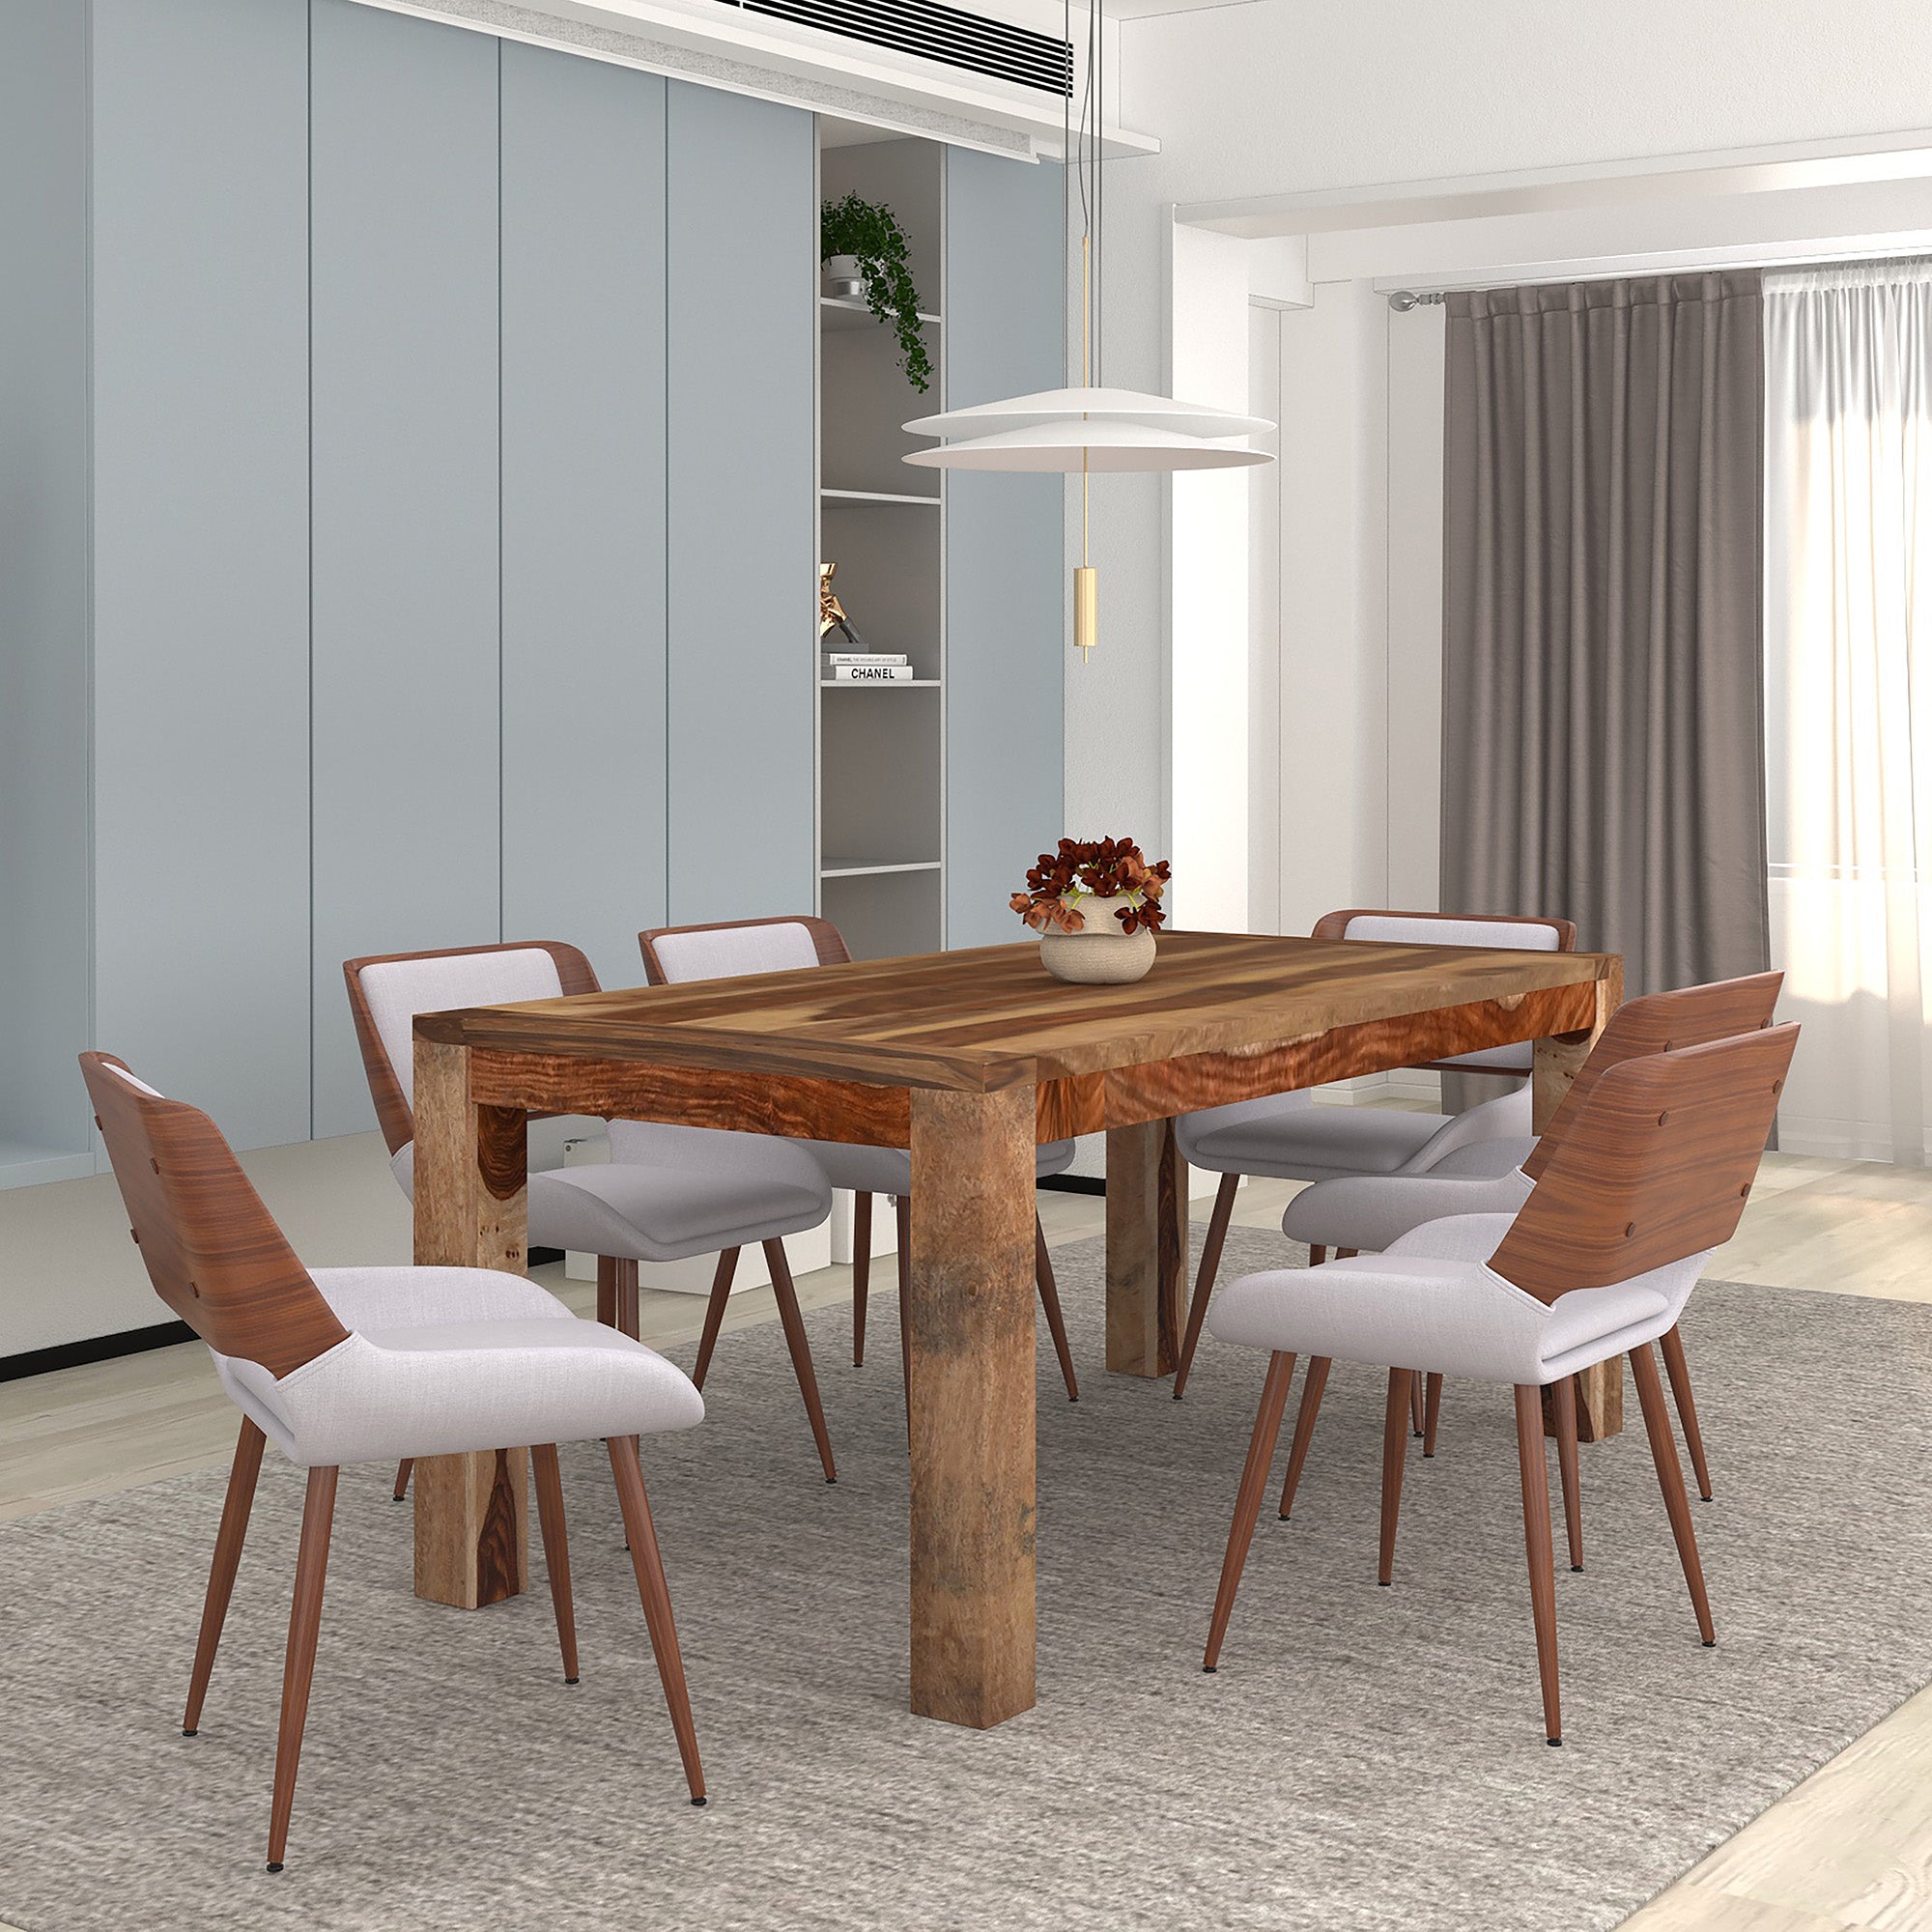 KRISH - 70" DINING TABLE- SOLID WOOD/ HUDSON GREY CHAIRS - 7PC DINING SET